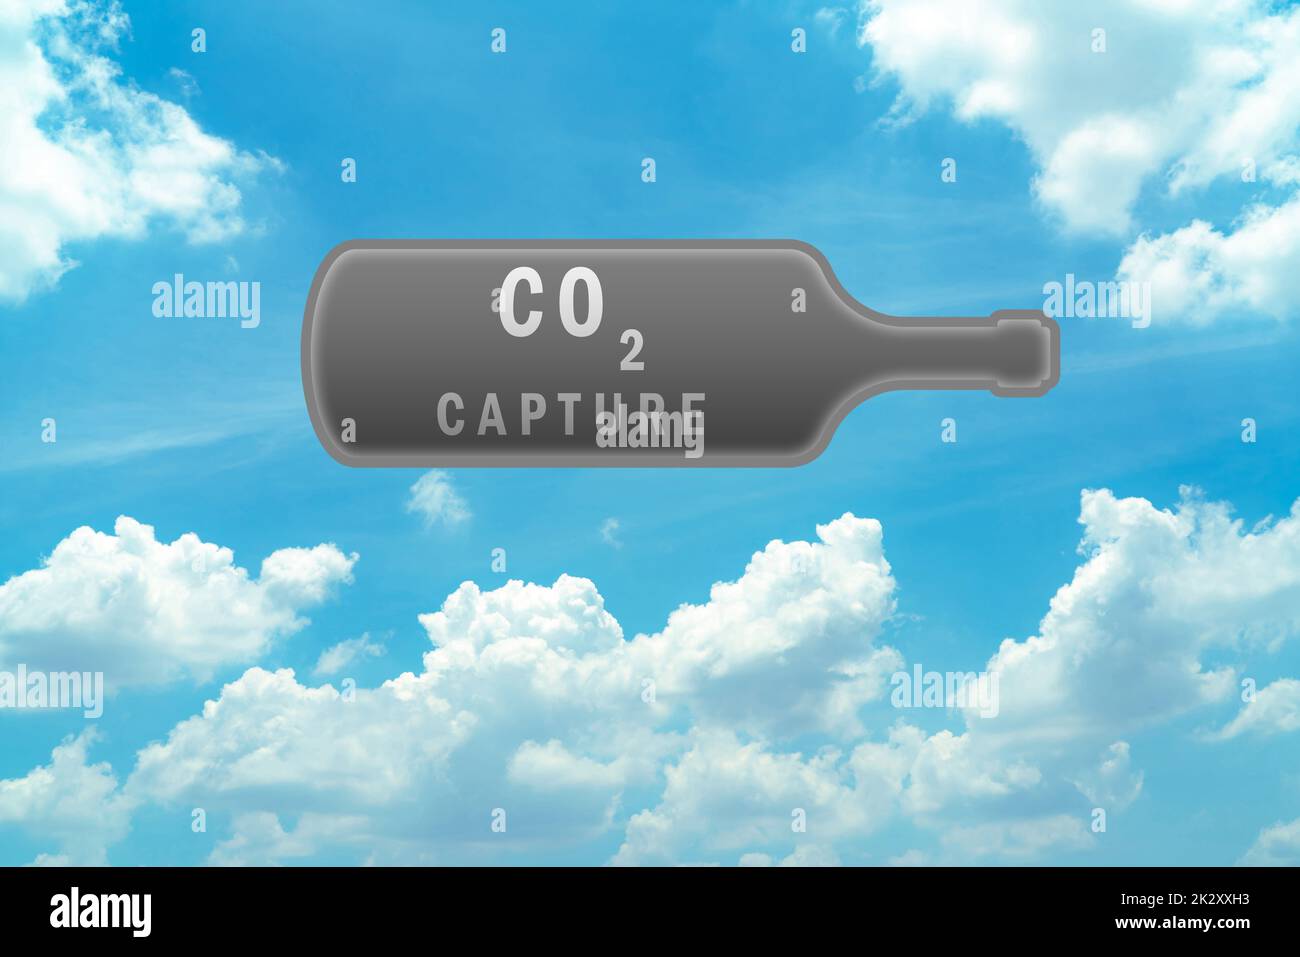 CO2 capture in gray bottle on blue sky and white cumulus clouds. Carbon capture and storage technology concept. Greenhouse gas. Carbon dioxide gas global air climate pollution. Environment issue. Stock Photo